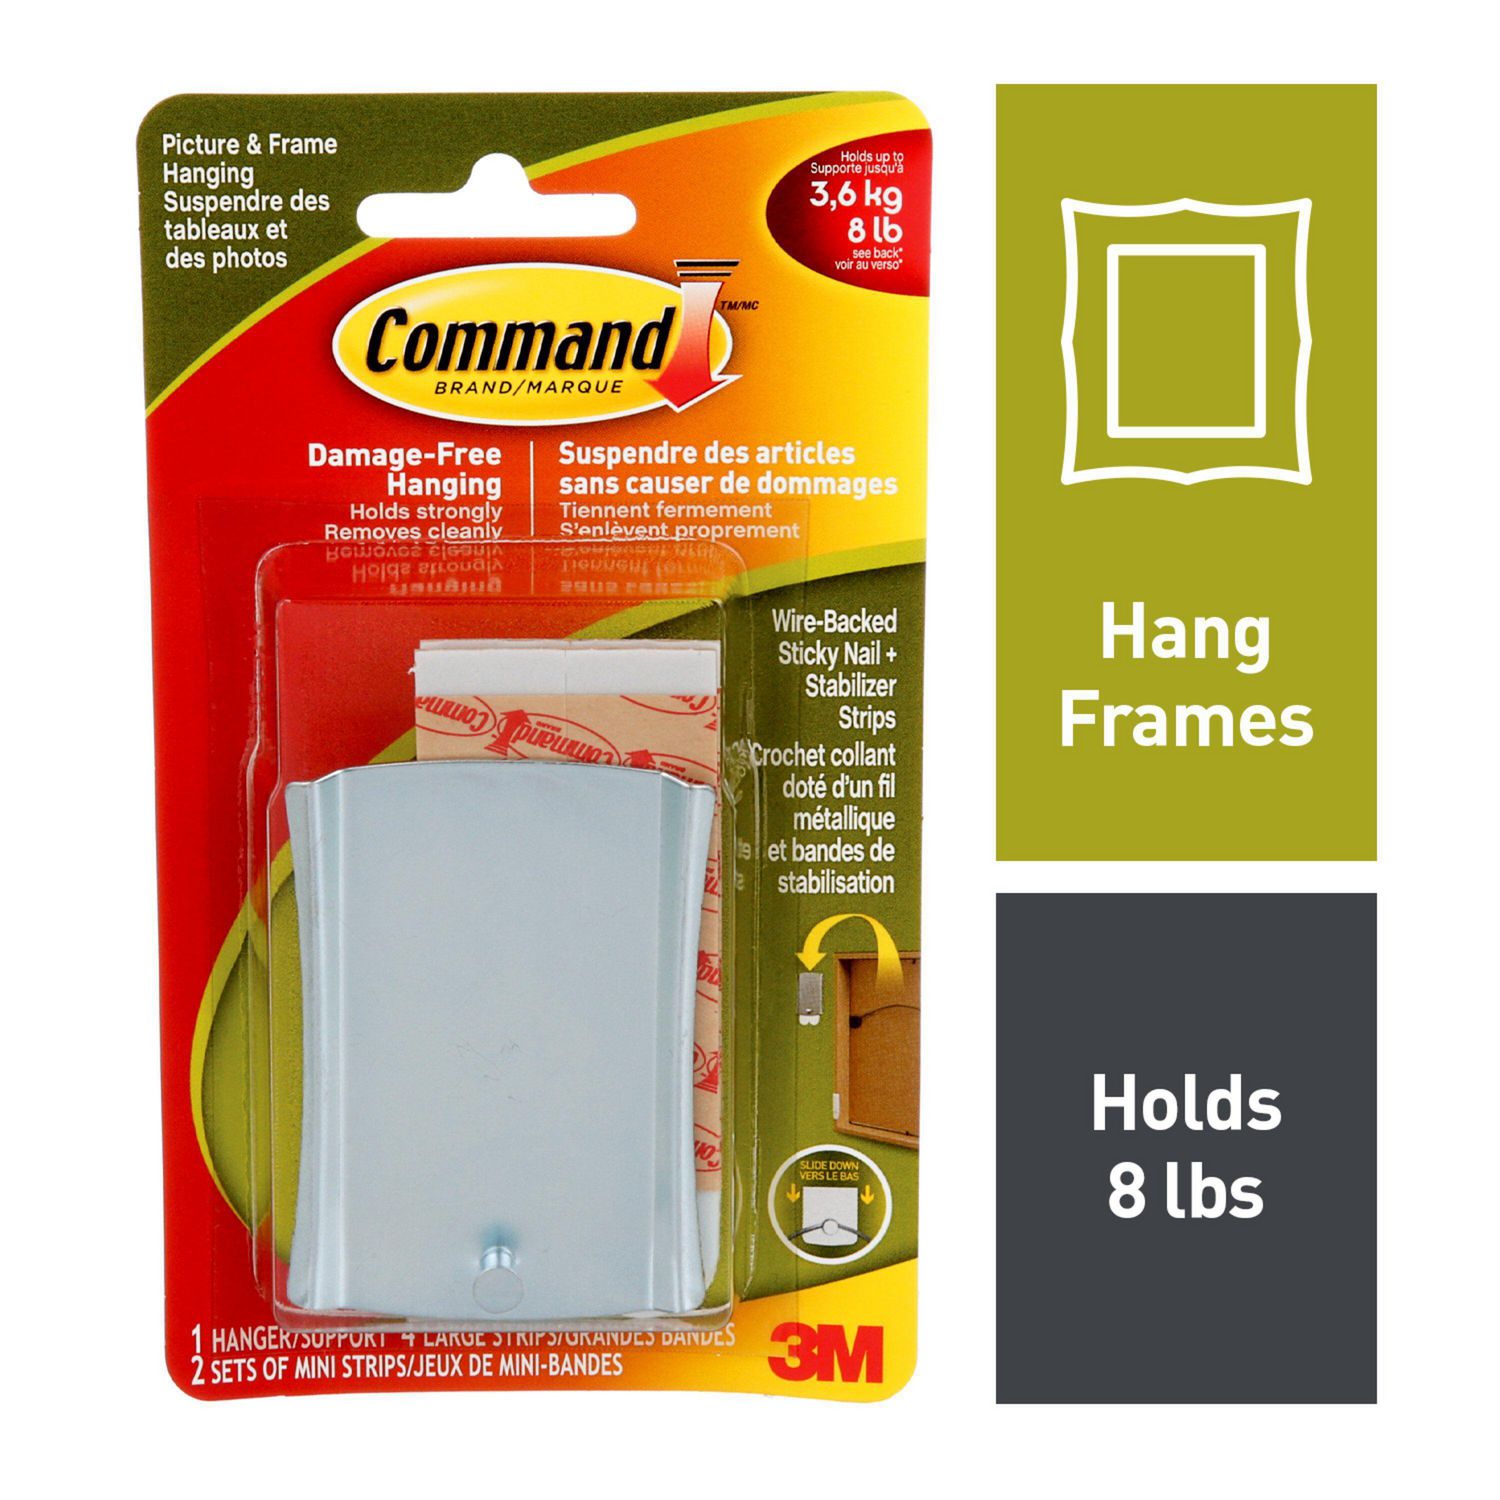 How to Use Command™ Strips for Hanging Pictures|Command™ Brand